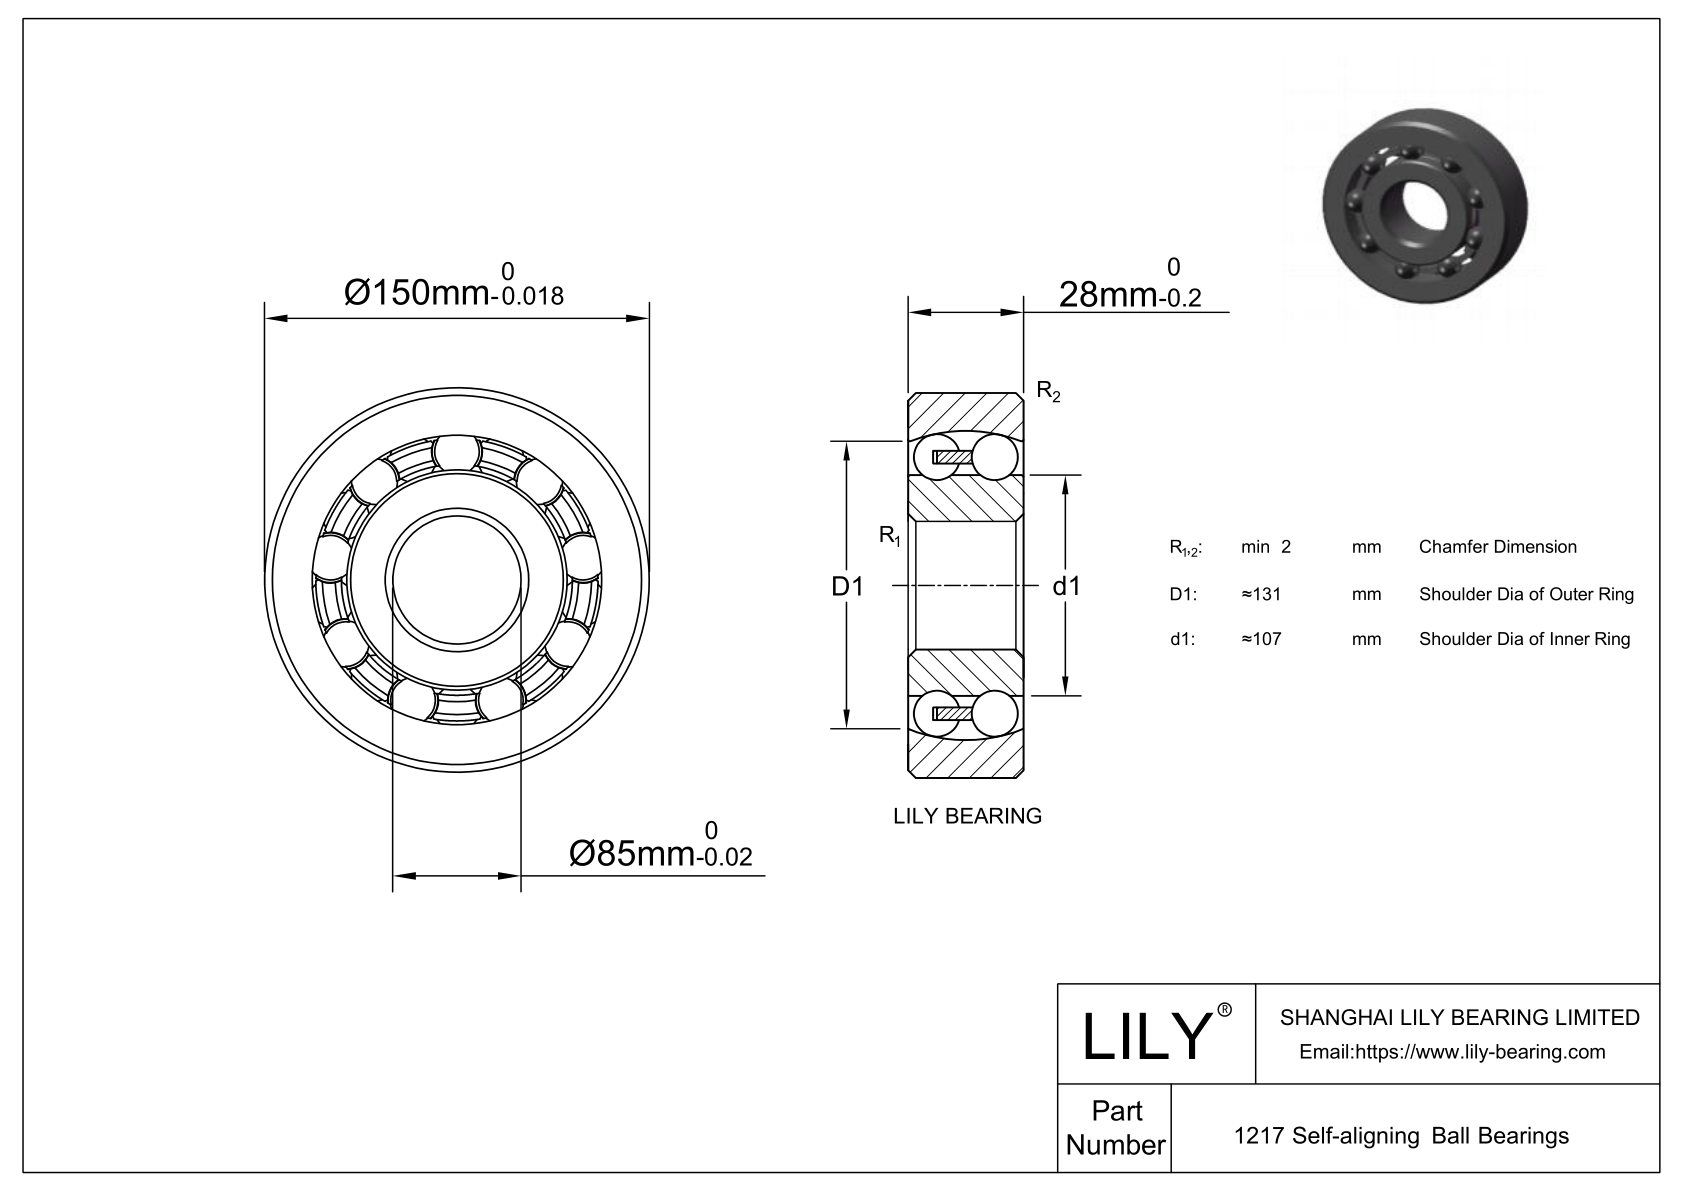 S1217 Stainless Steel Self Aligning Ball Bearings cad drawing